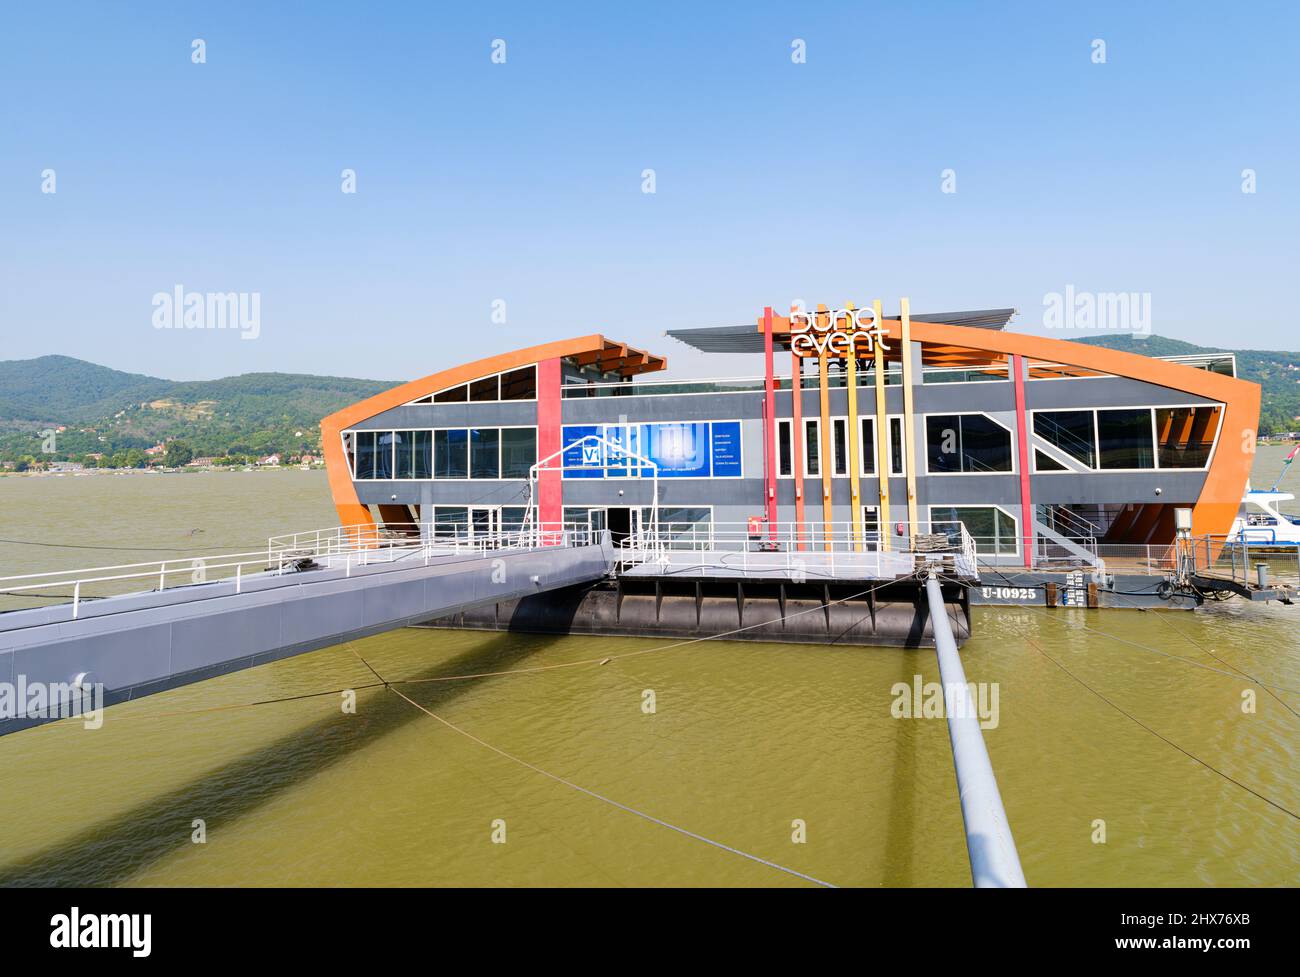 Ship used for events. The Danube near Visegrad at the Danube Bend. Europe, East Europe, Hungary Stock Photo